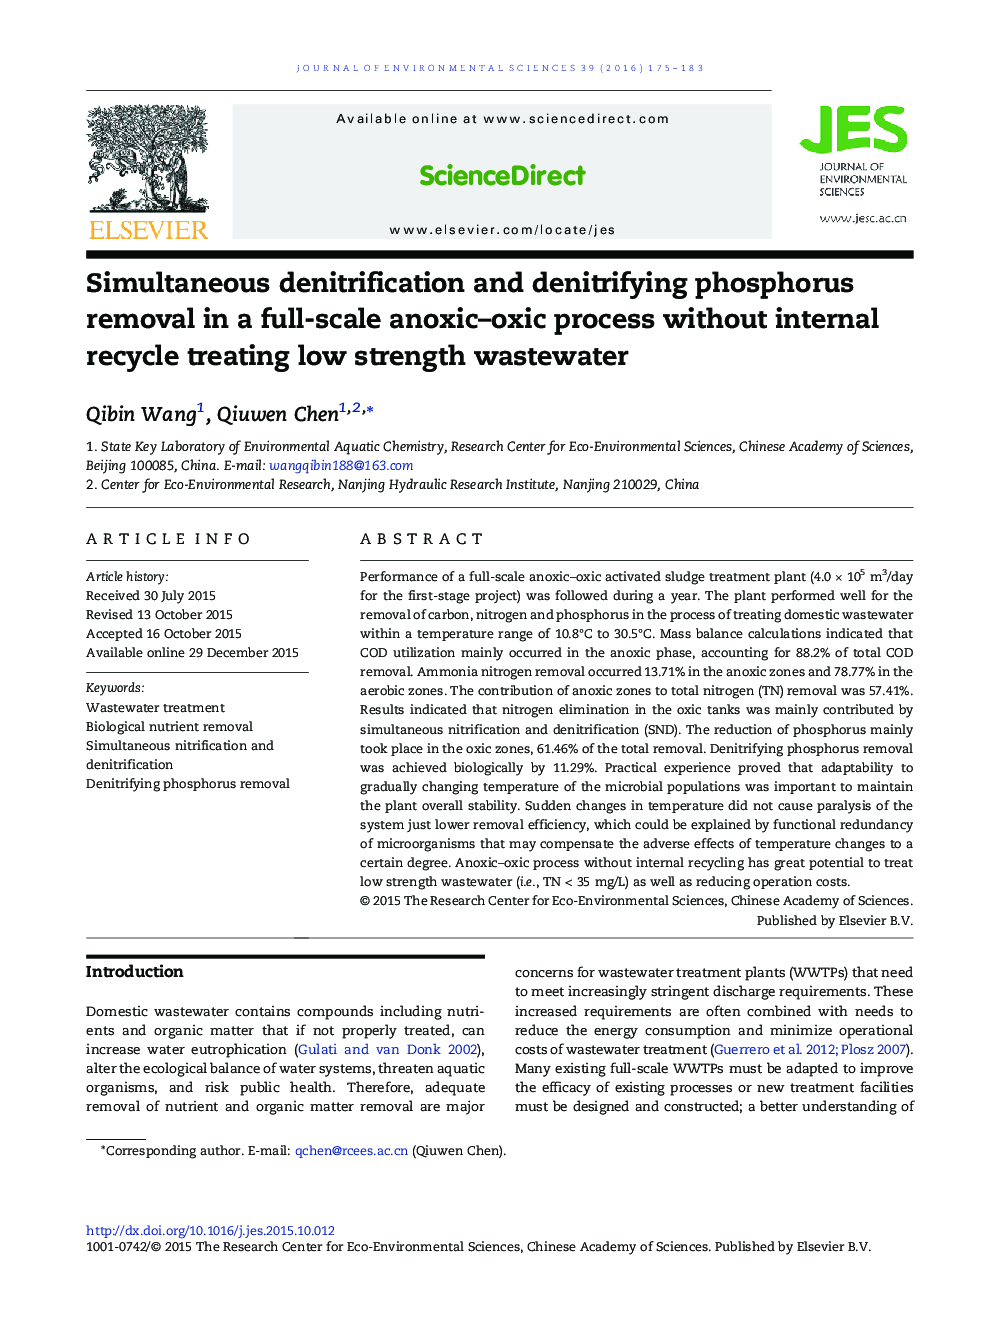 Simultaneous denitrification and denitrifying phosphorus removal in a full-scale anoxic–oxic process without internal recycle treating low strength wastewater